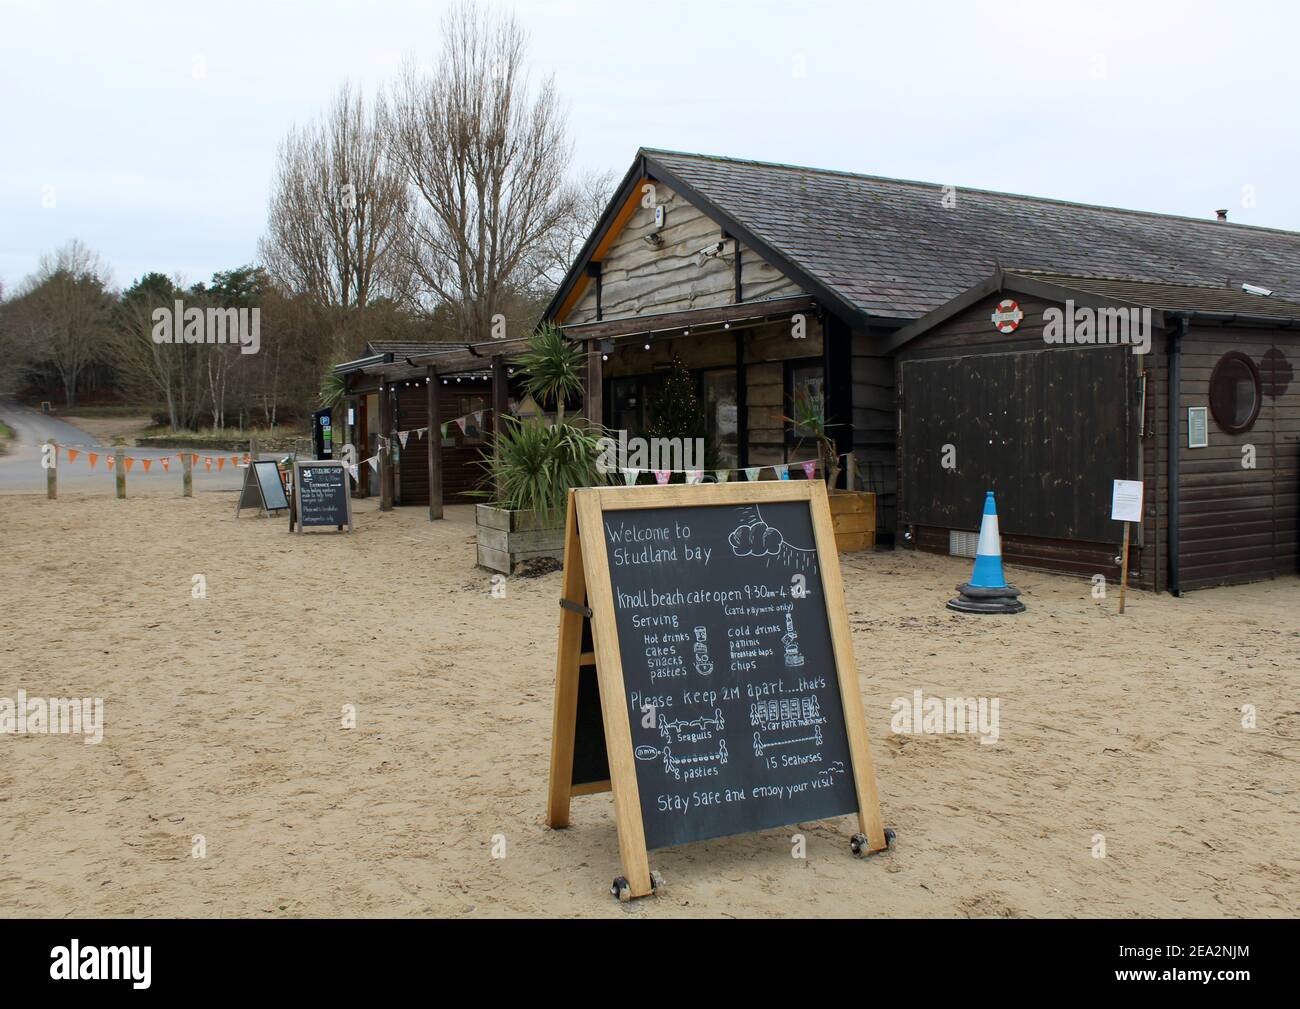 Knoll Beach Cafe in Studland, Dorset with information sandwich board in the foreground. Stock Photo